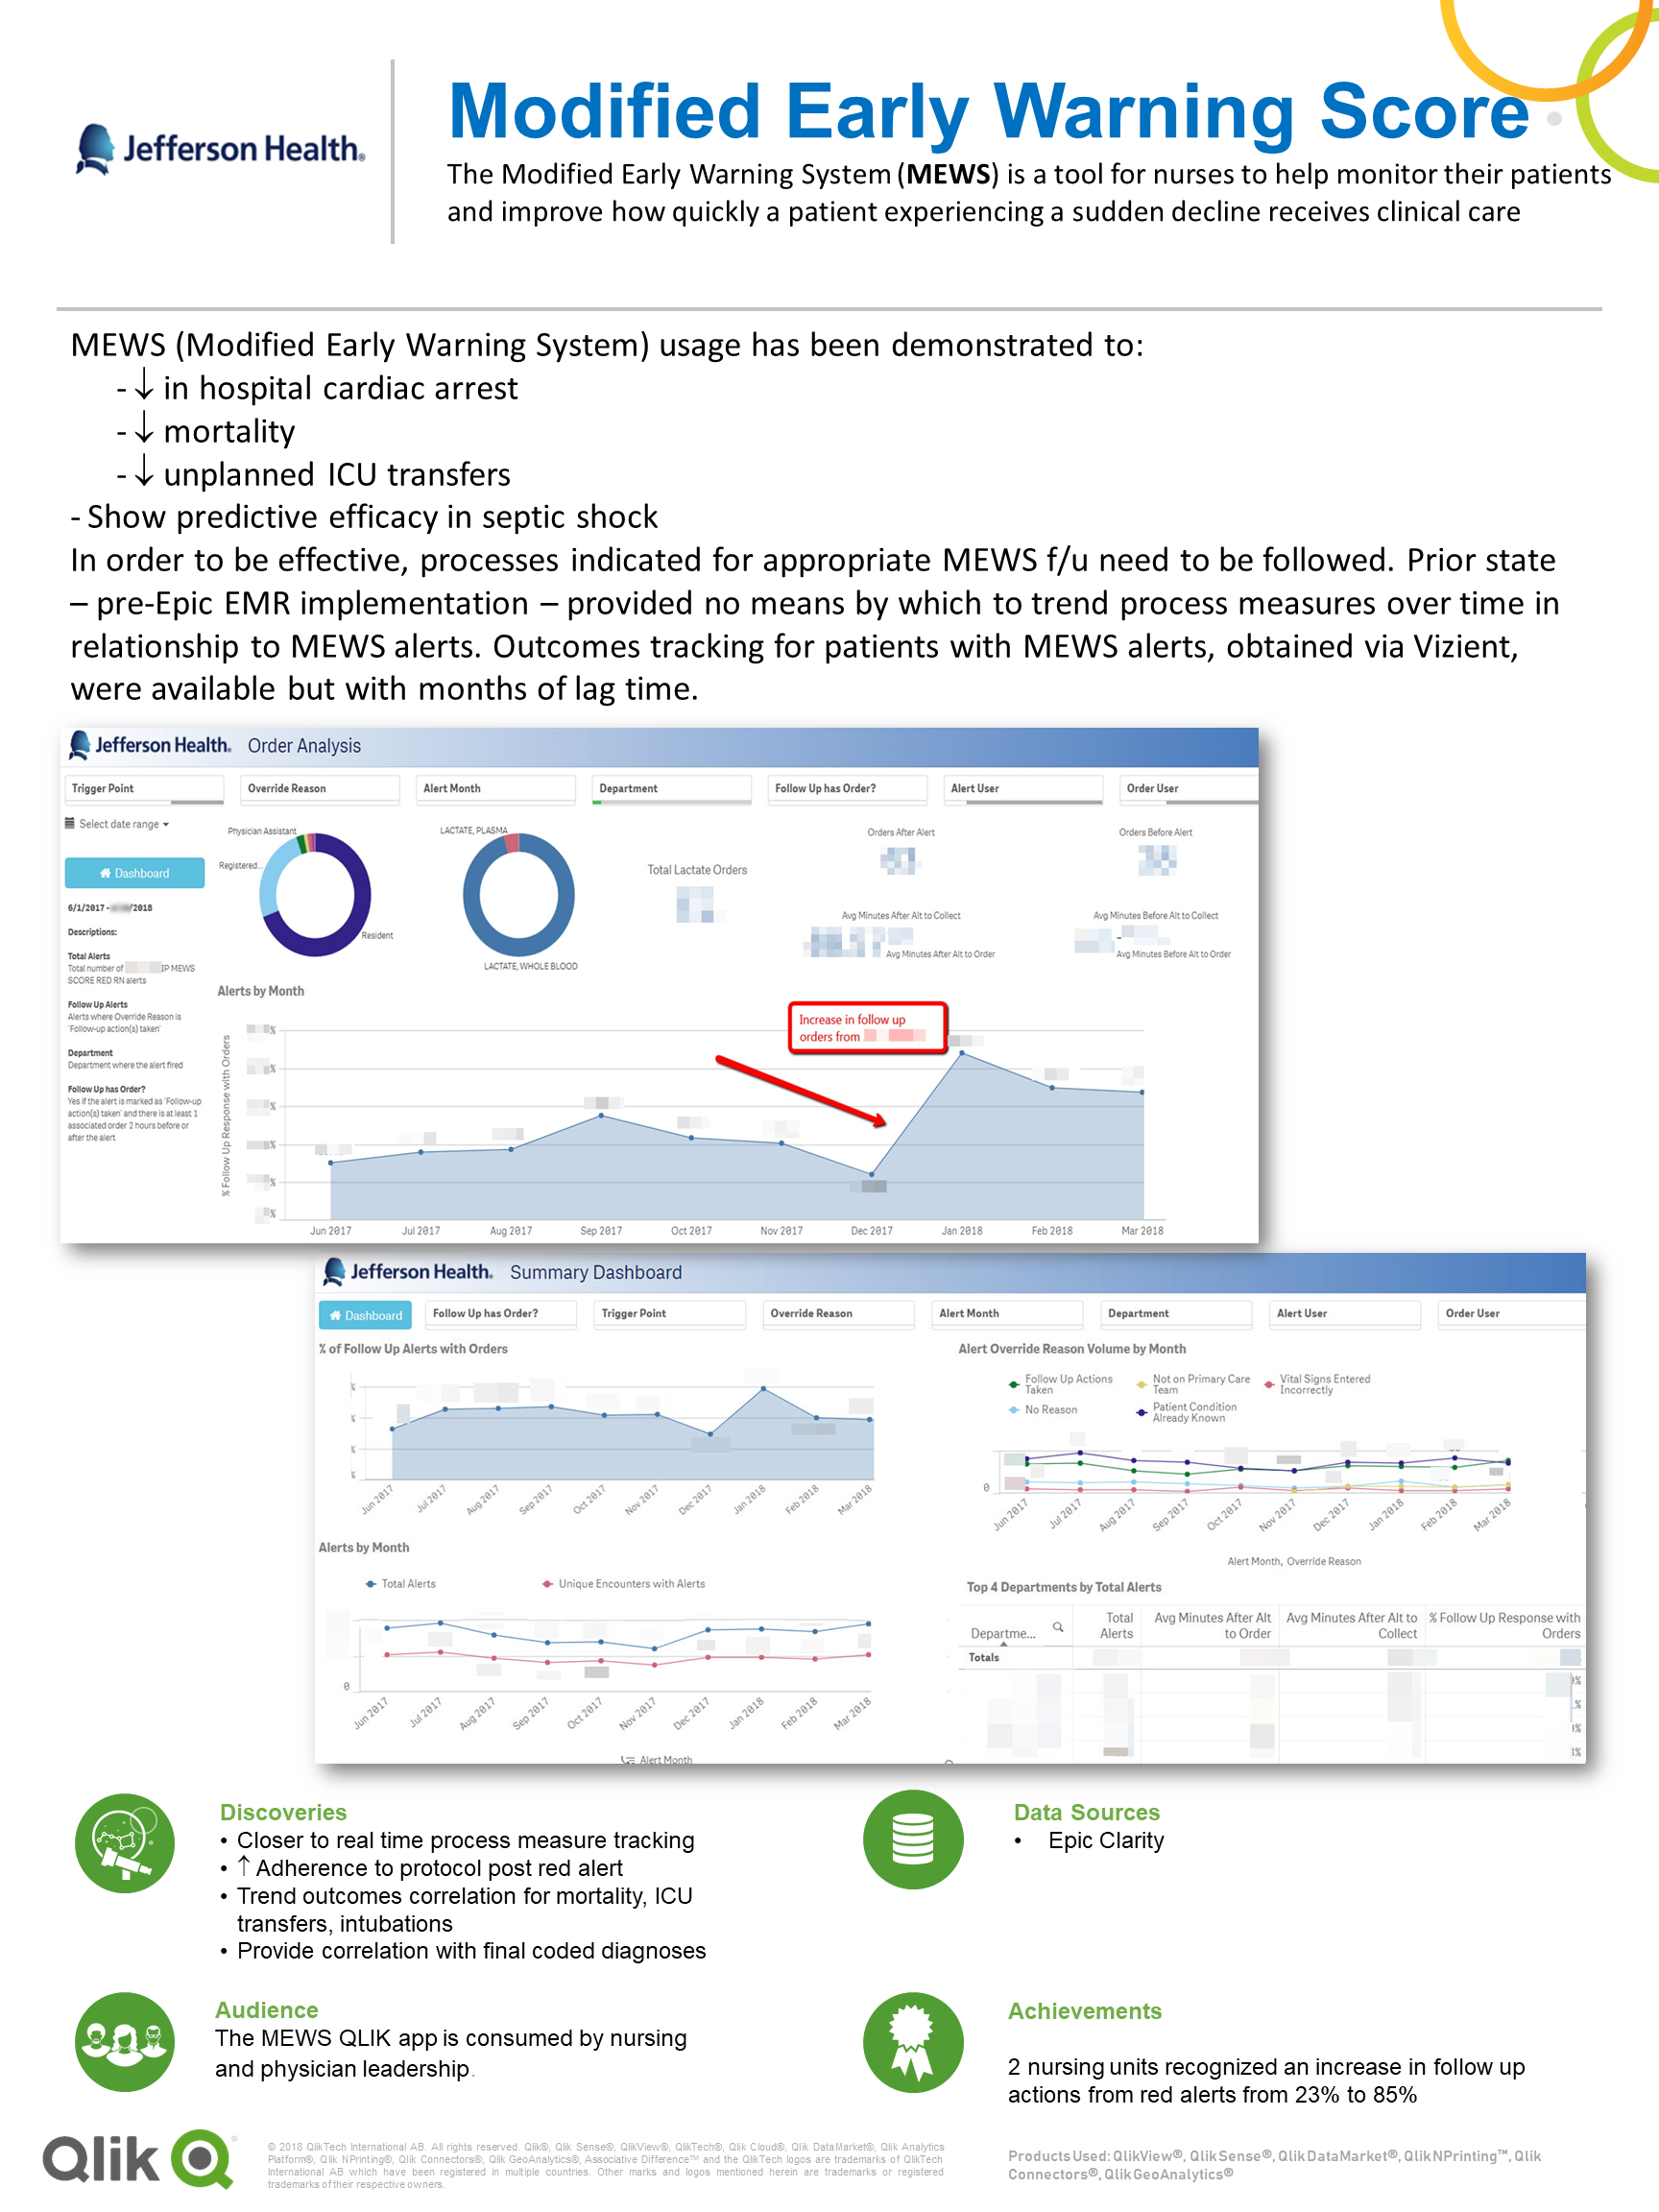 6 Qonnections Healthcare Poster - Jefferson Health - Modified Early Warning Score MEWS.png